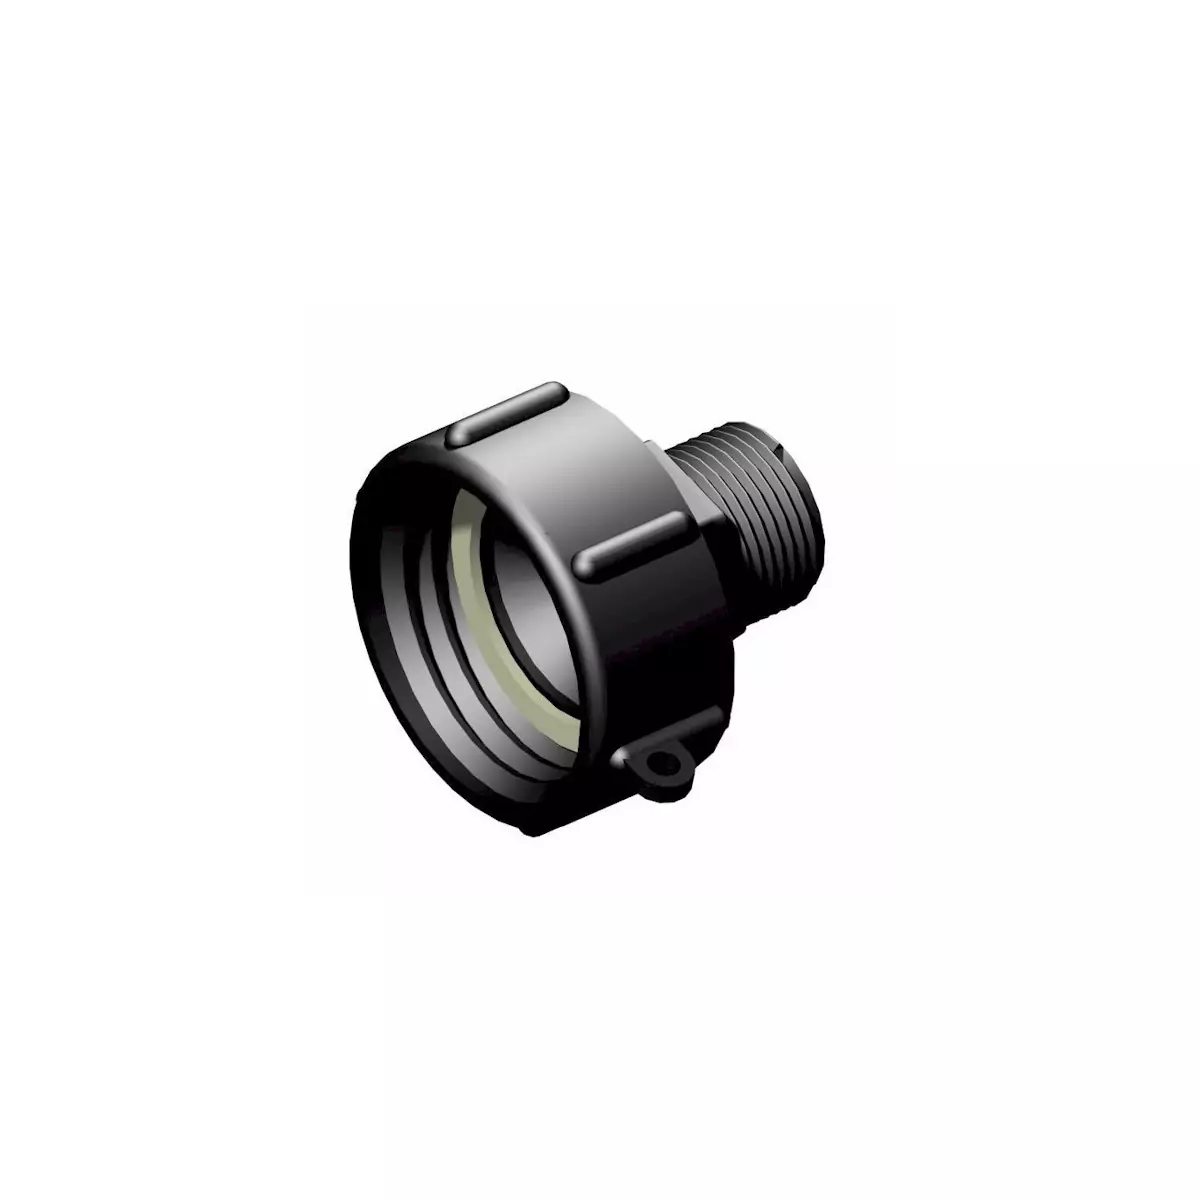 Product sheet 2 "S60x6 female connector - male 1", not gas